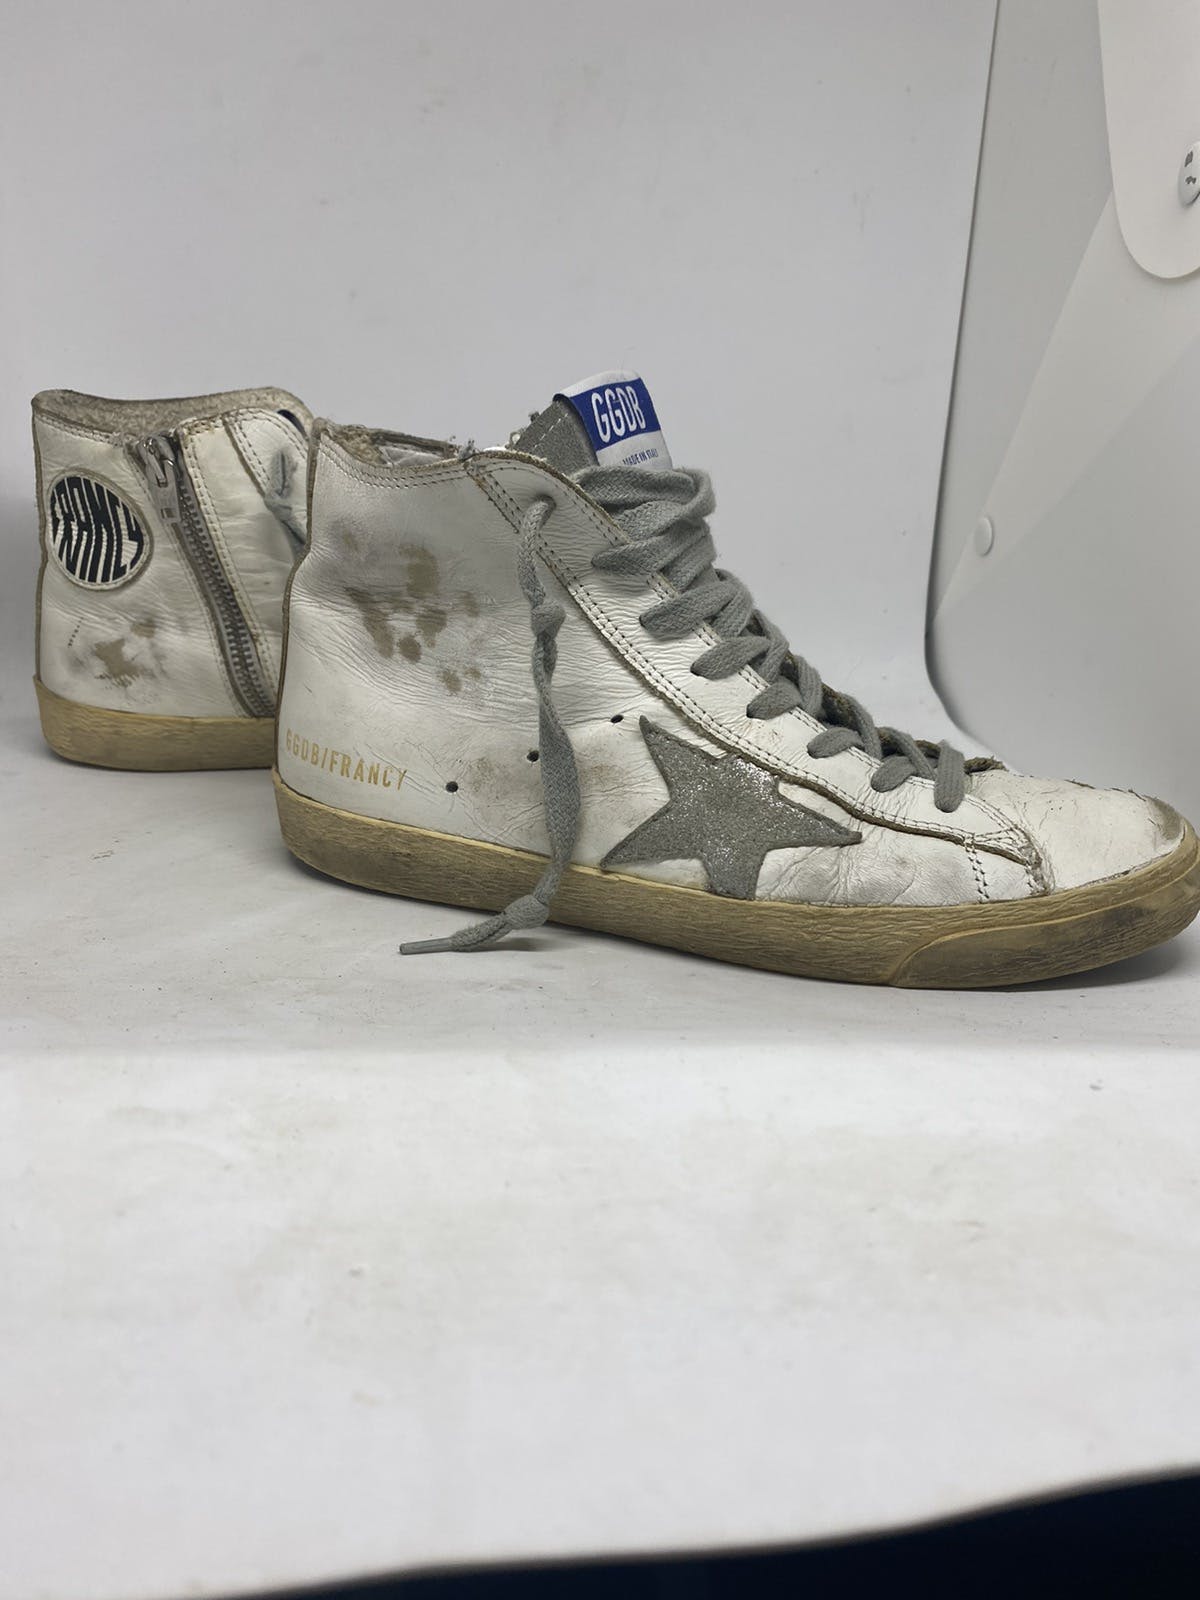 Golden Goose Francy suede patch sneakers size 36 - 2